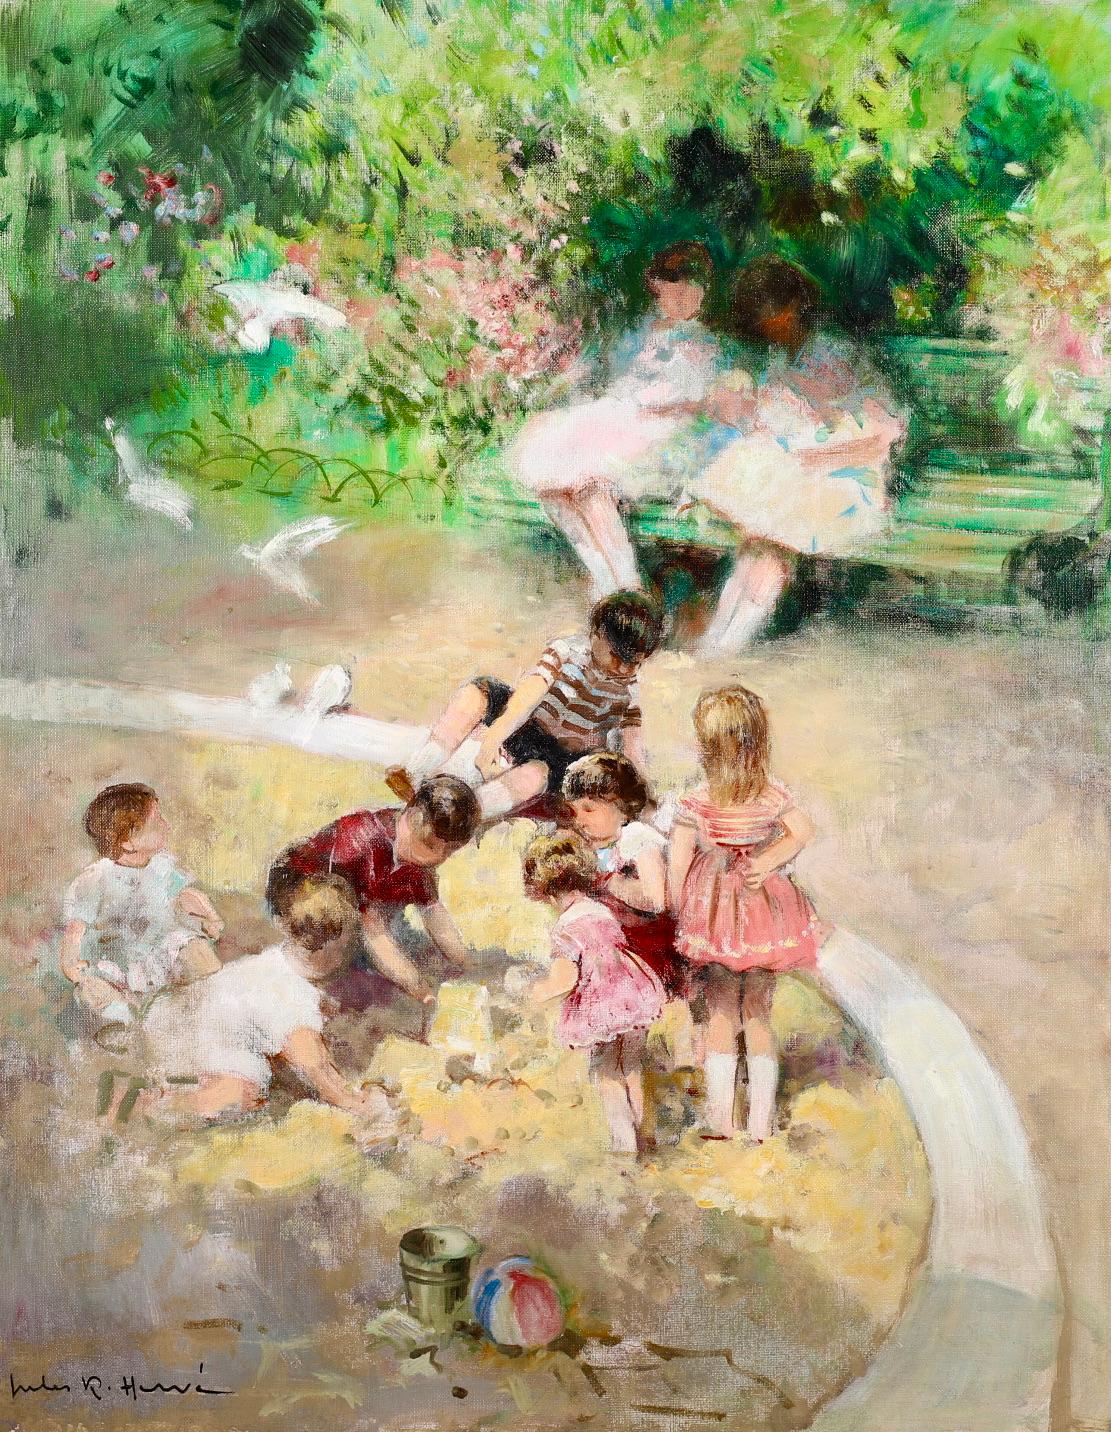 Signed oil on canvas figures in landscape circa 1950 by French impressionist painter Jules Rene Herve. The work depicts several children dressed in summer clothes playing in a sandpit on a park. There is a bucket and ball in the foreground and